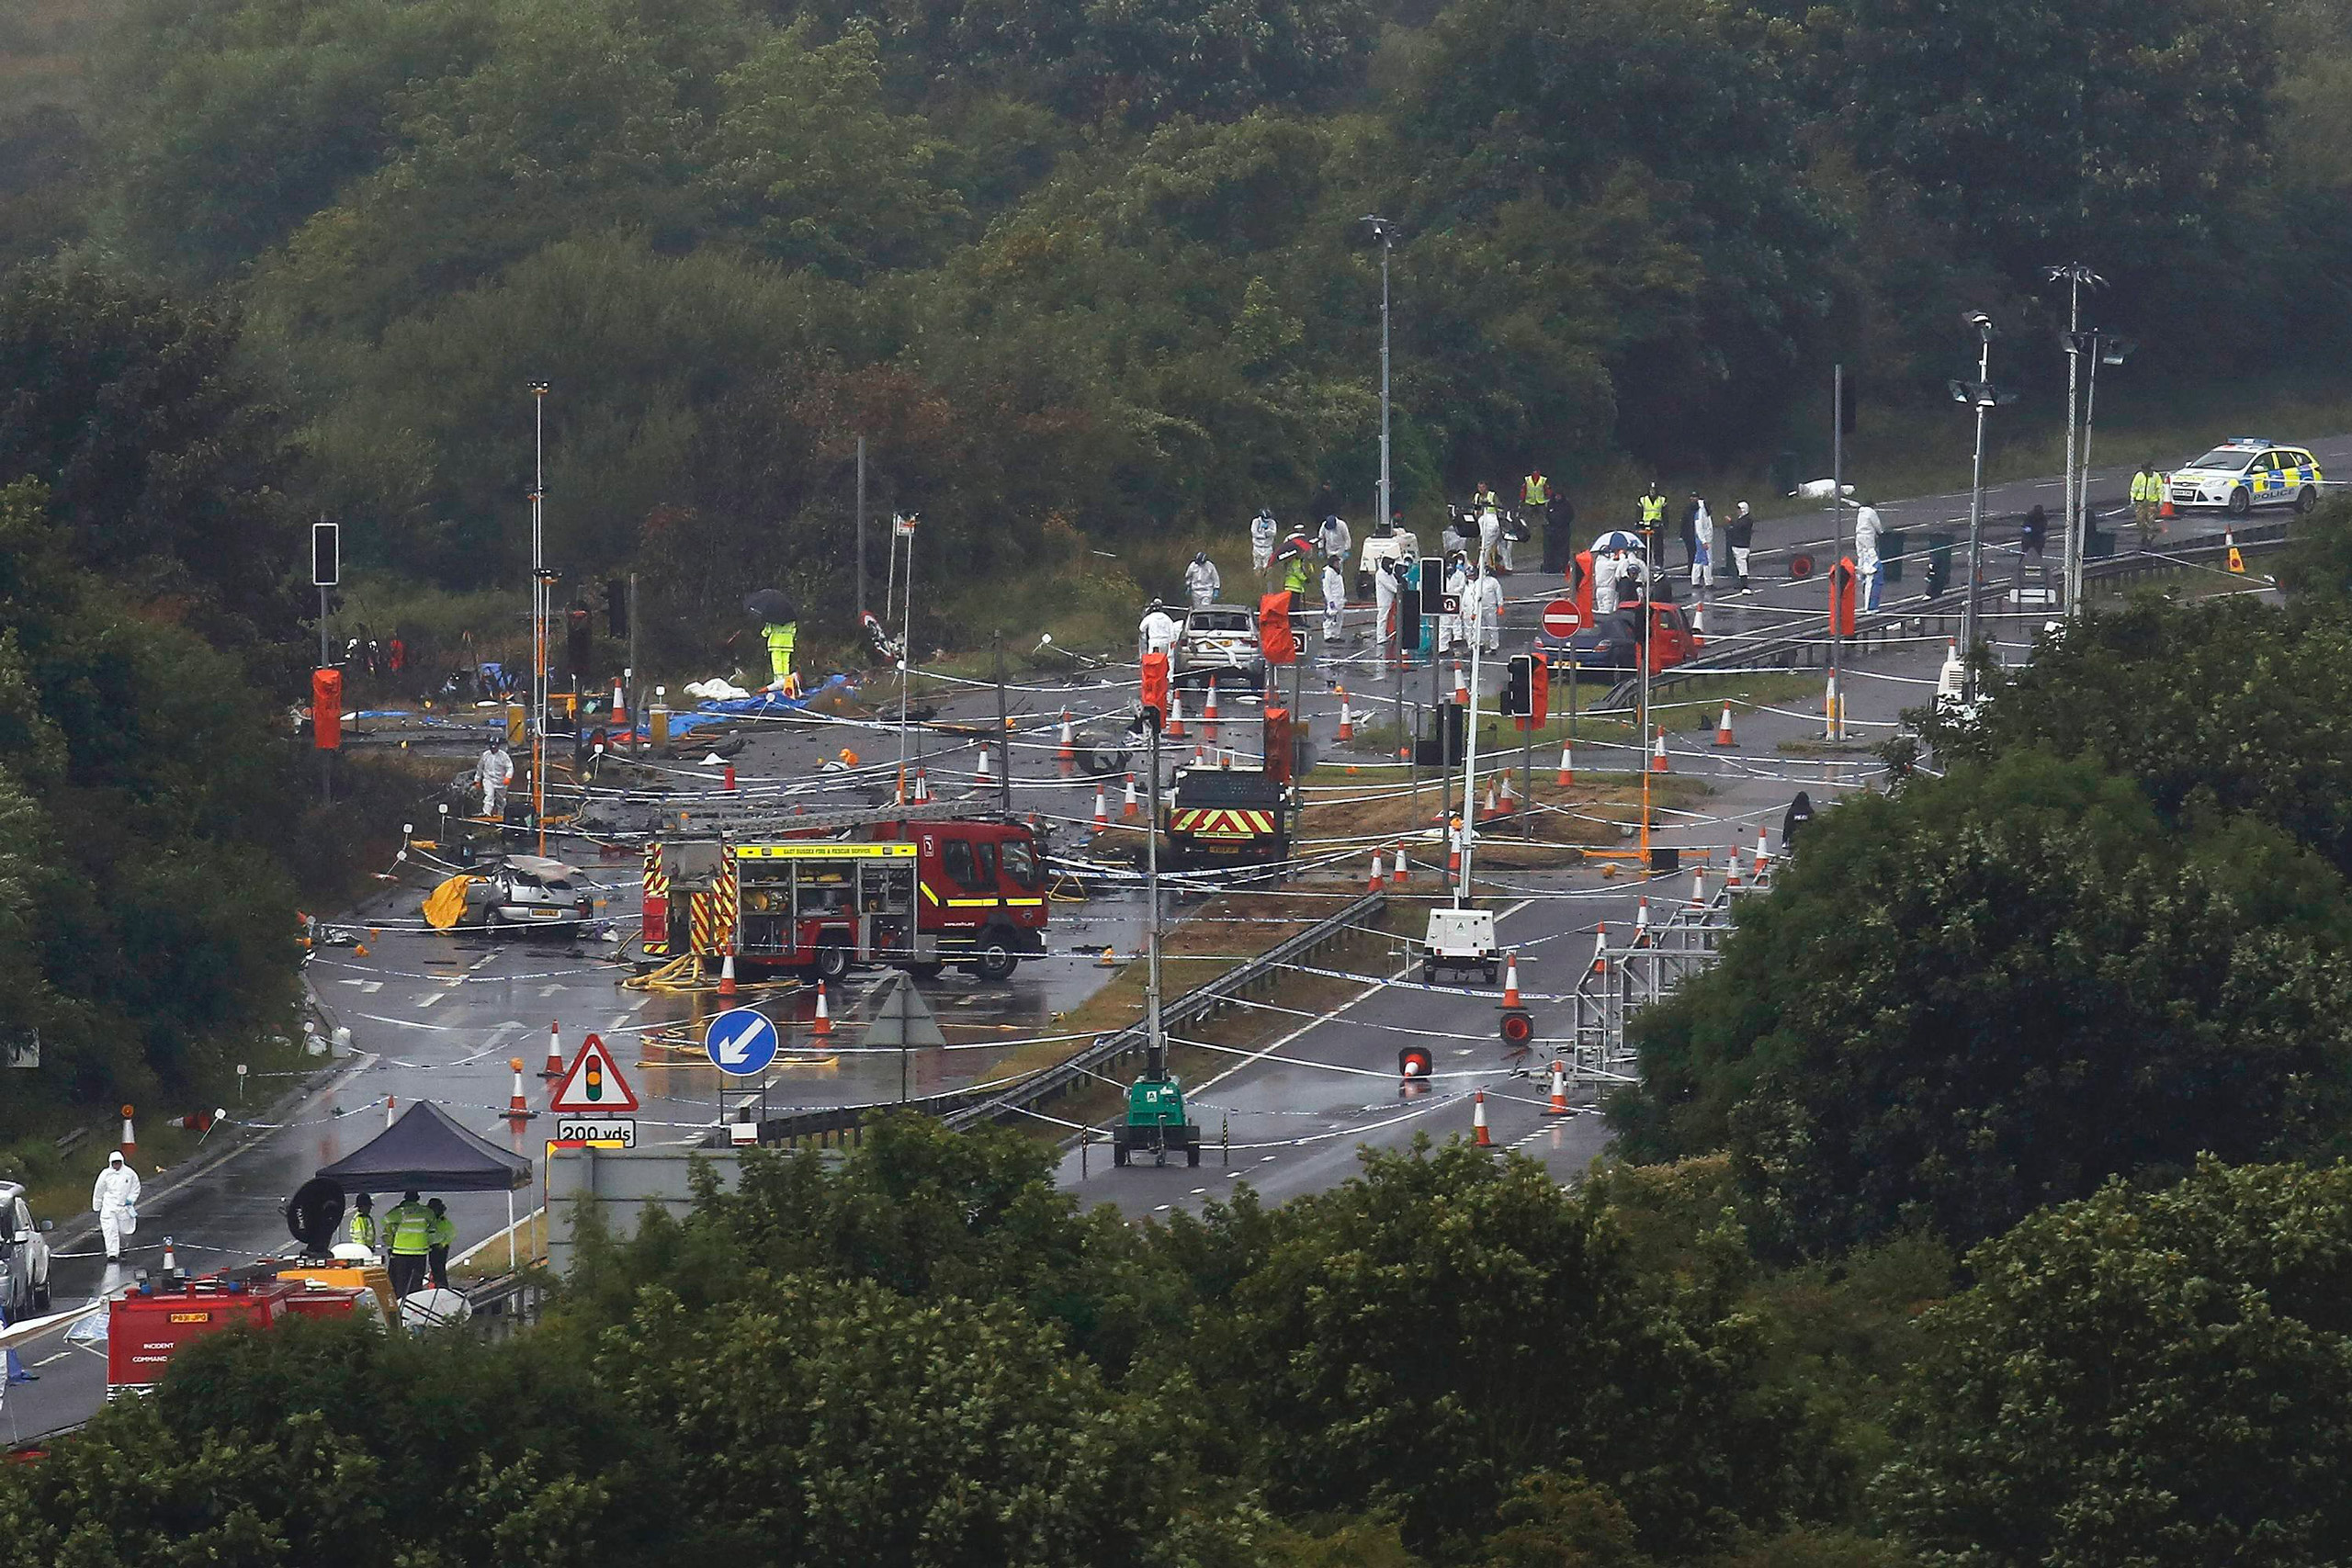 Emergency services and crash investigation officers continue to work at the site where a Hawker Hunter fighter jet crashed onto the A27 road at Shoreham near Brighton, U.K., Aug. 24, 2015. (Luke MacGregor—Reuters)